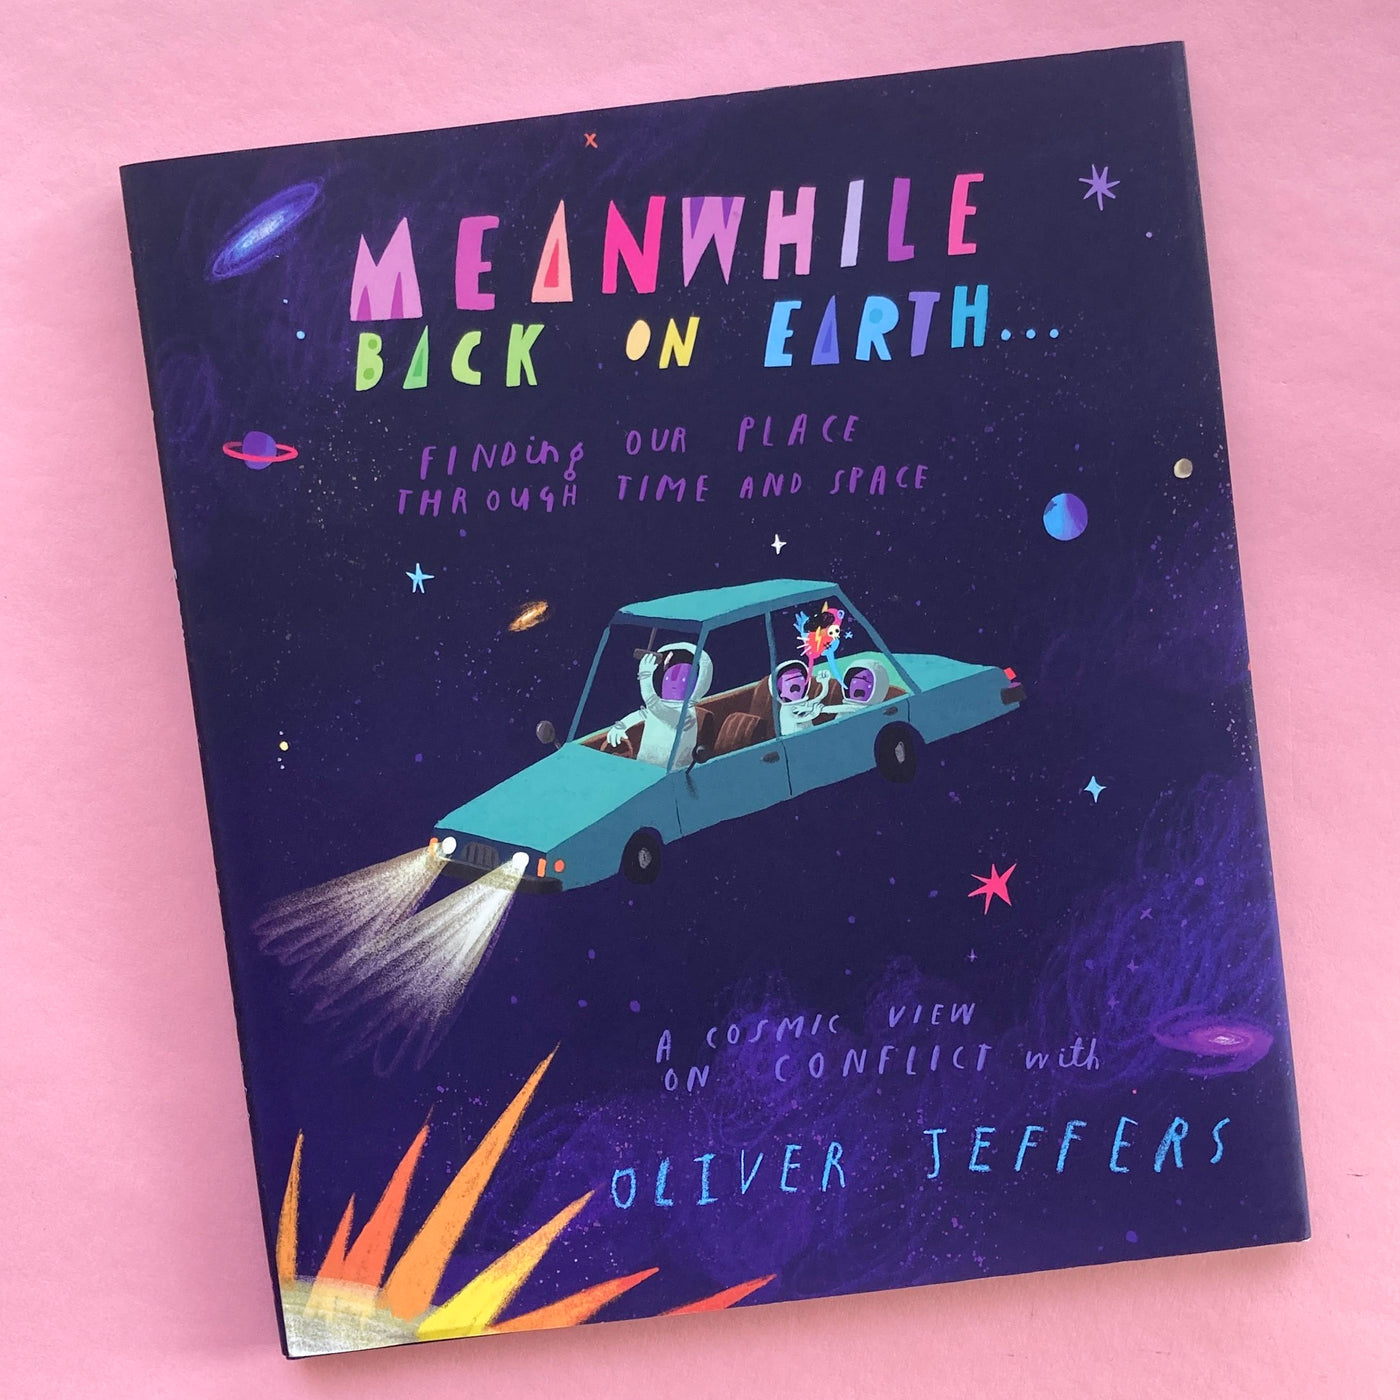 Meanwhile Back on Earth...Finding Our Place Through Time and Space by Oliver Jeffers